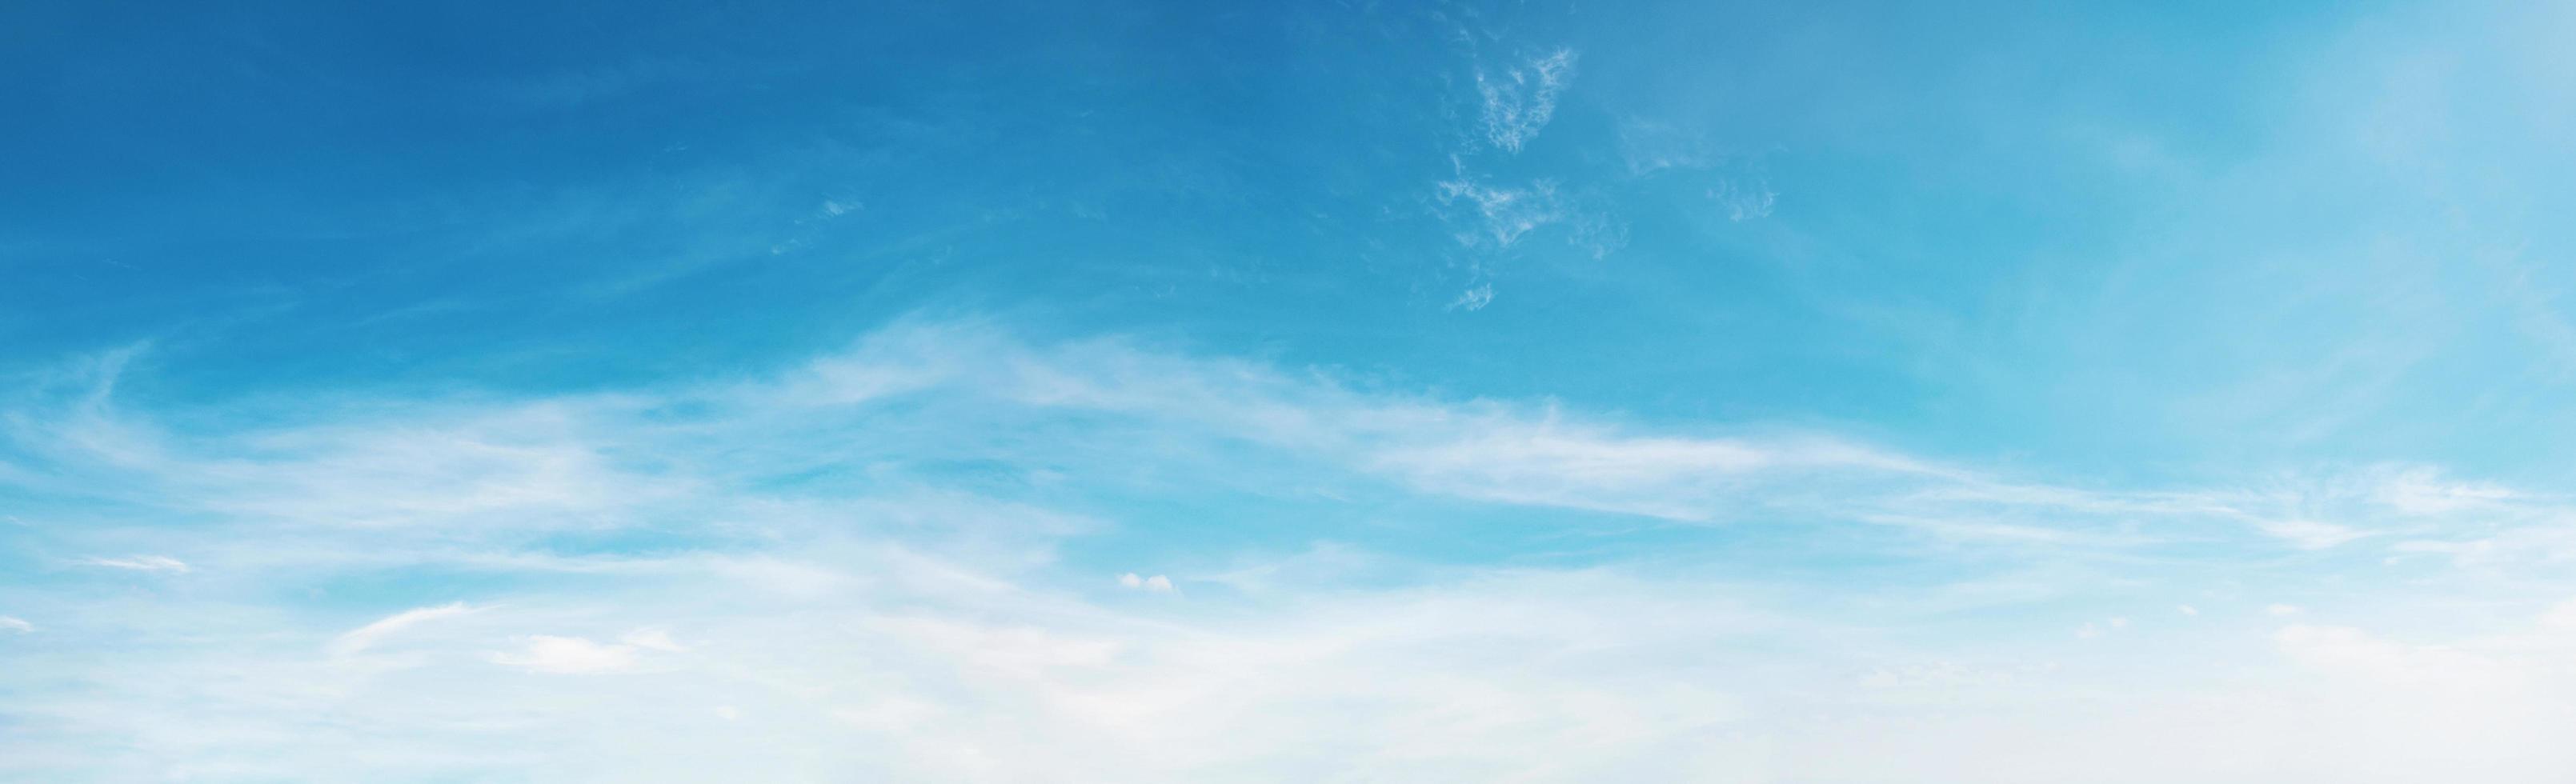 panorama blue sky with cloud and sunshine background photo